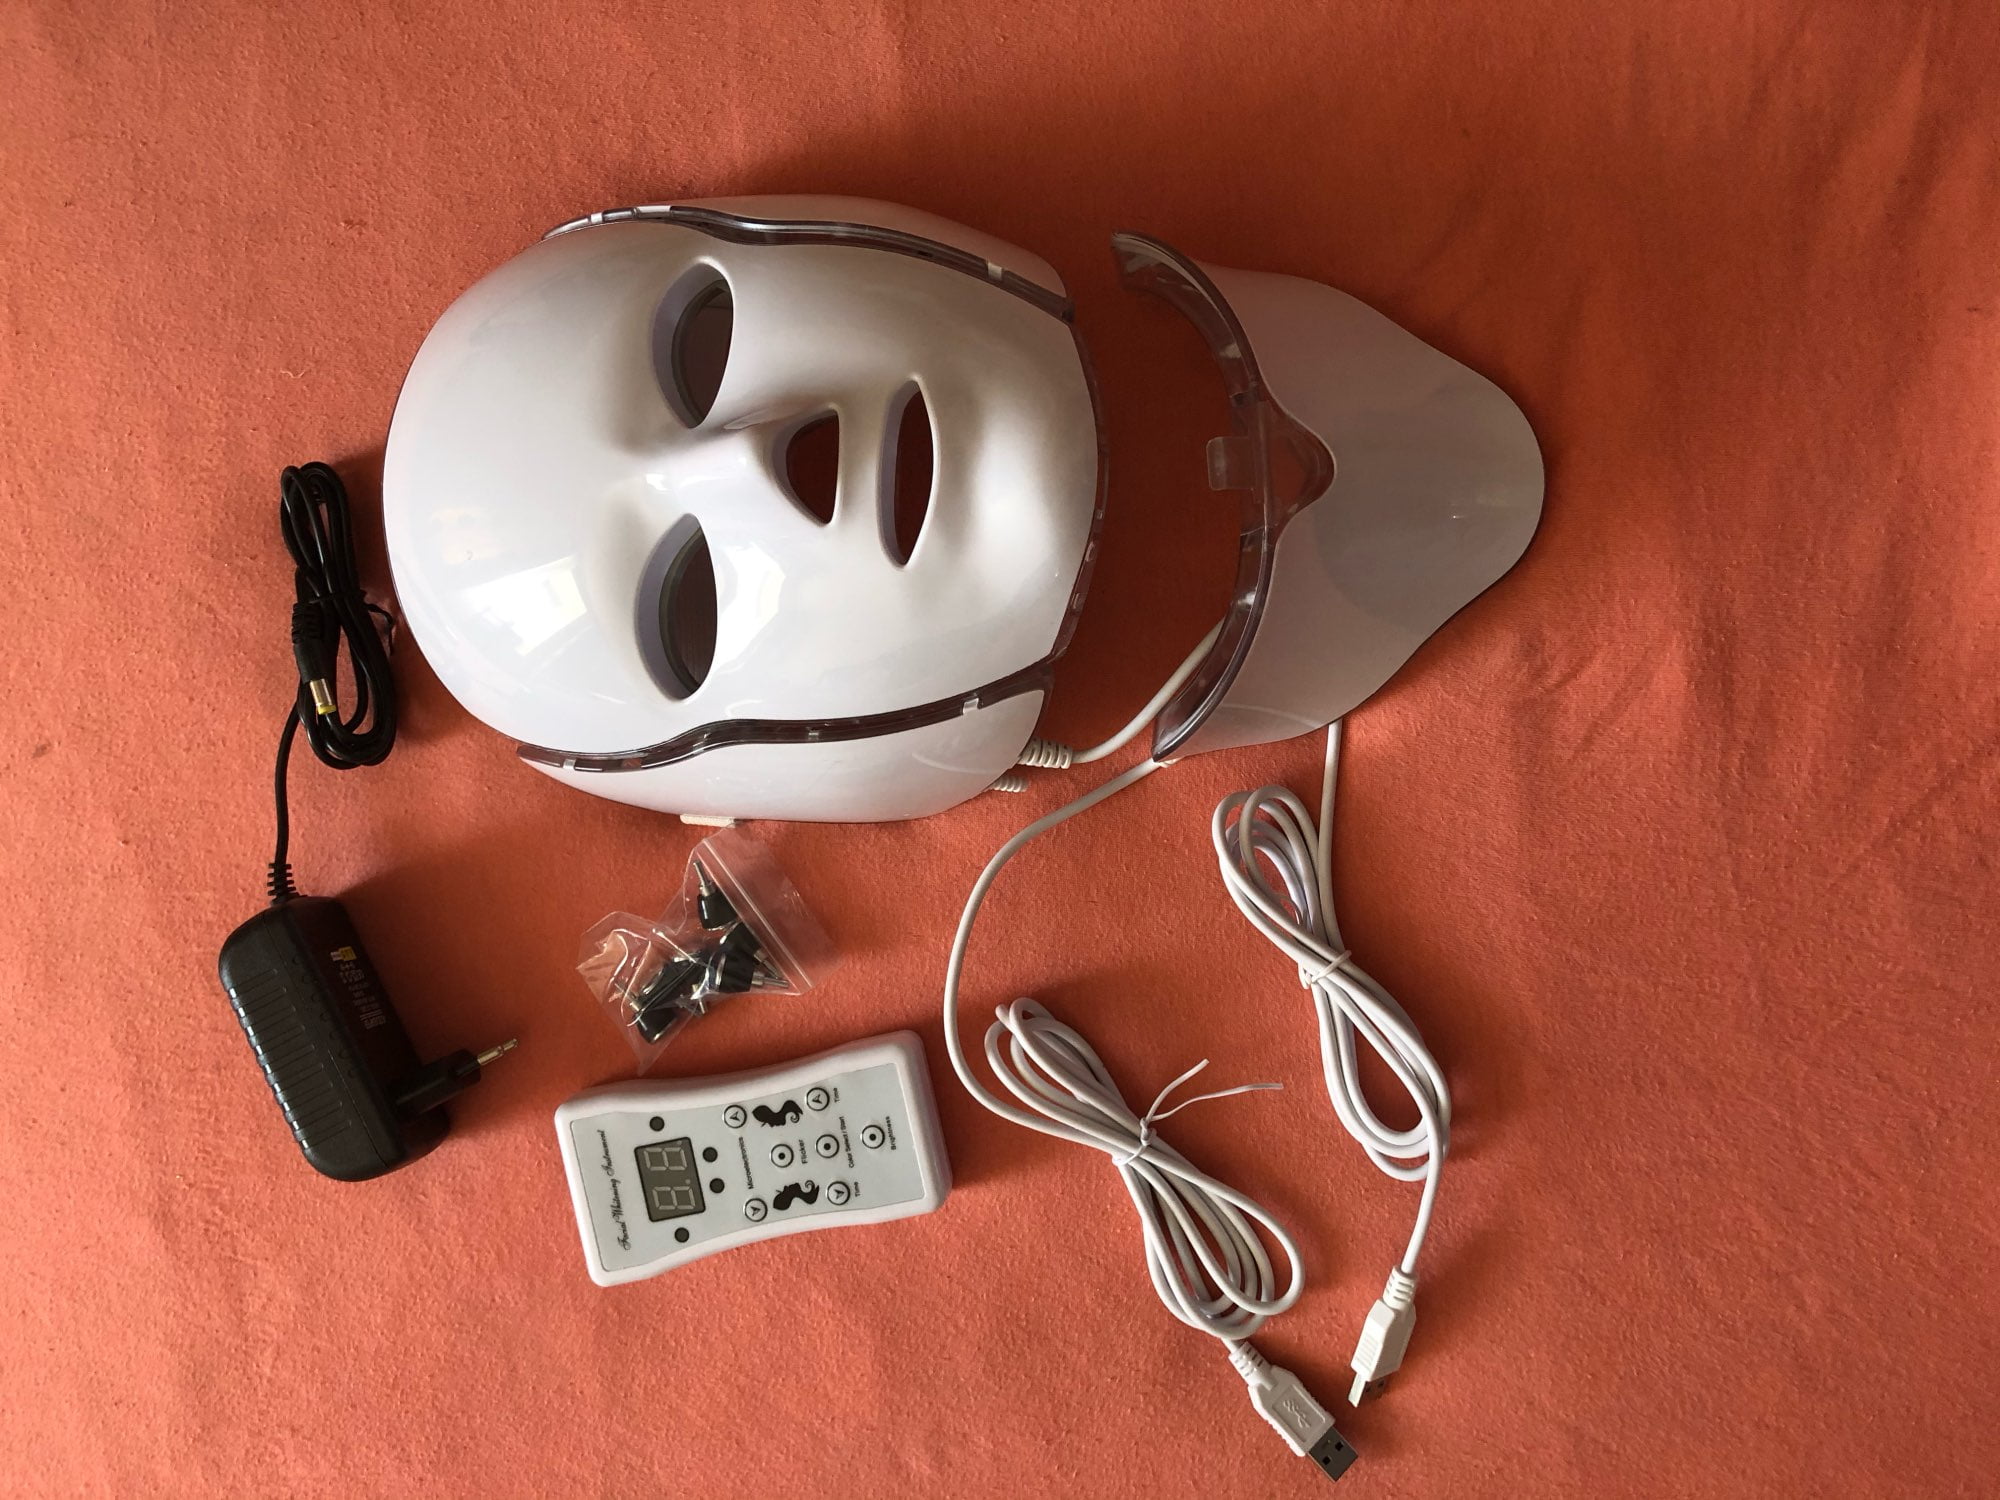 LED Light Therapy Facial Mask for Anti-Aging, Acne, and Wrinkles photo review